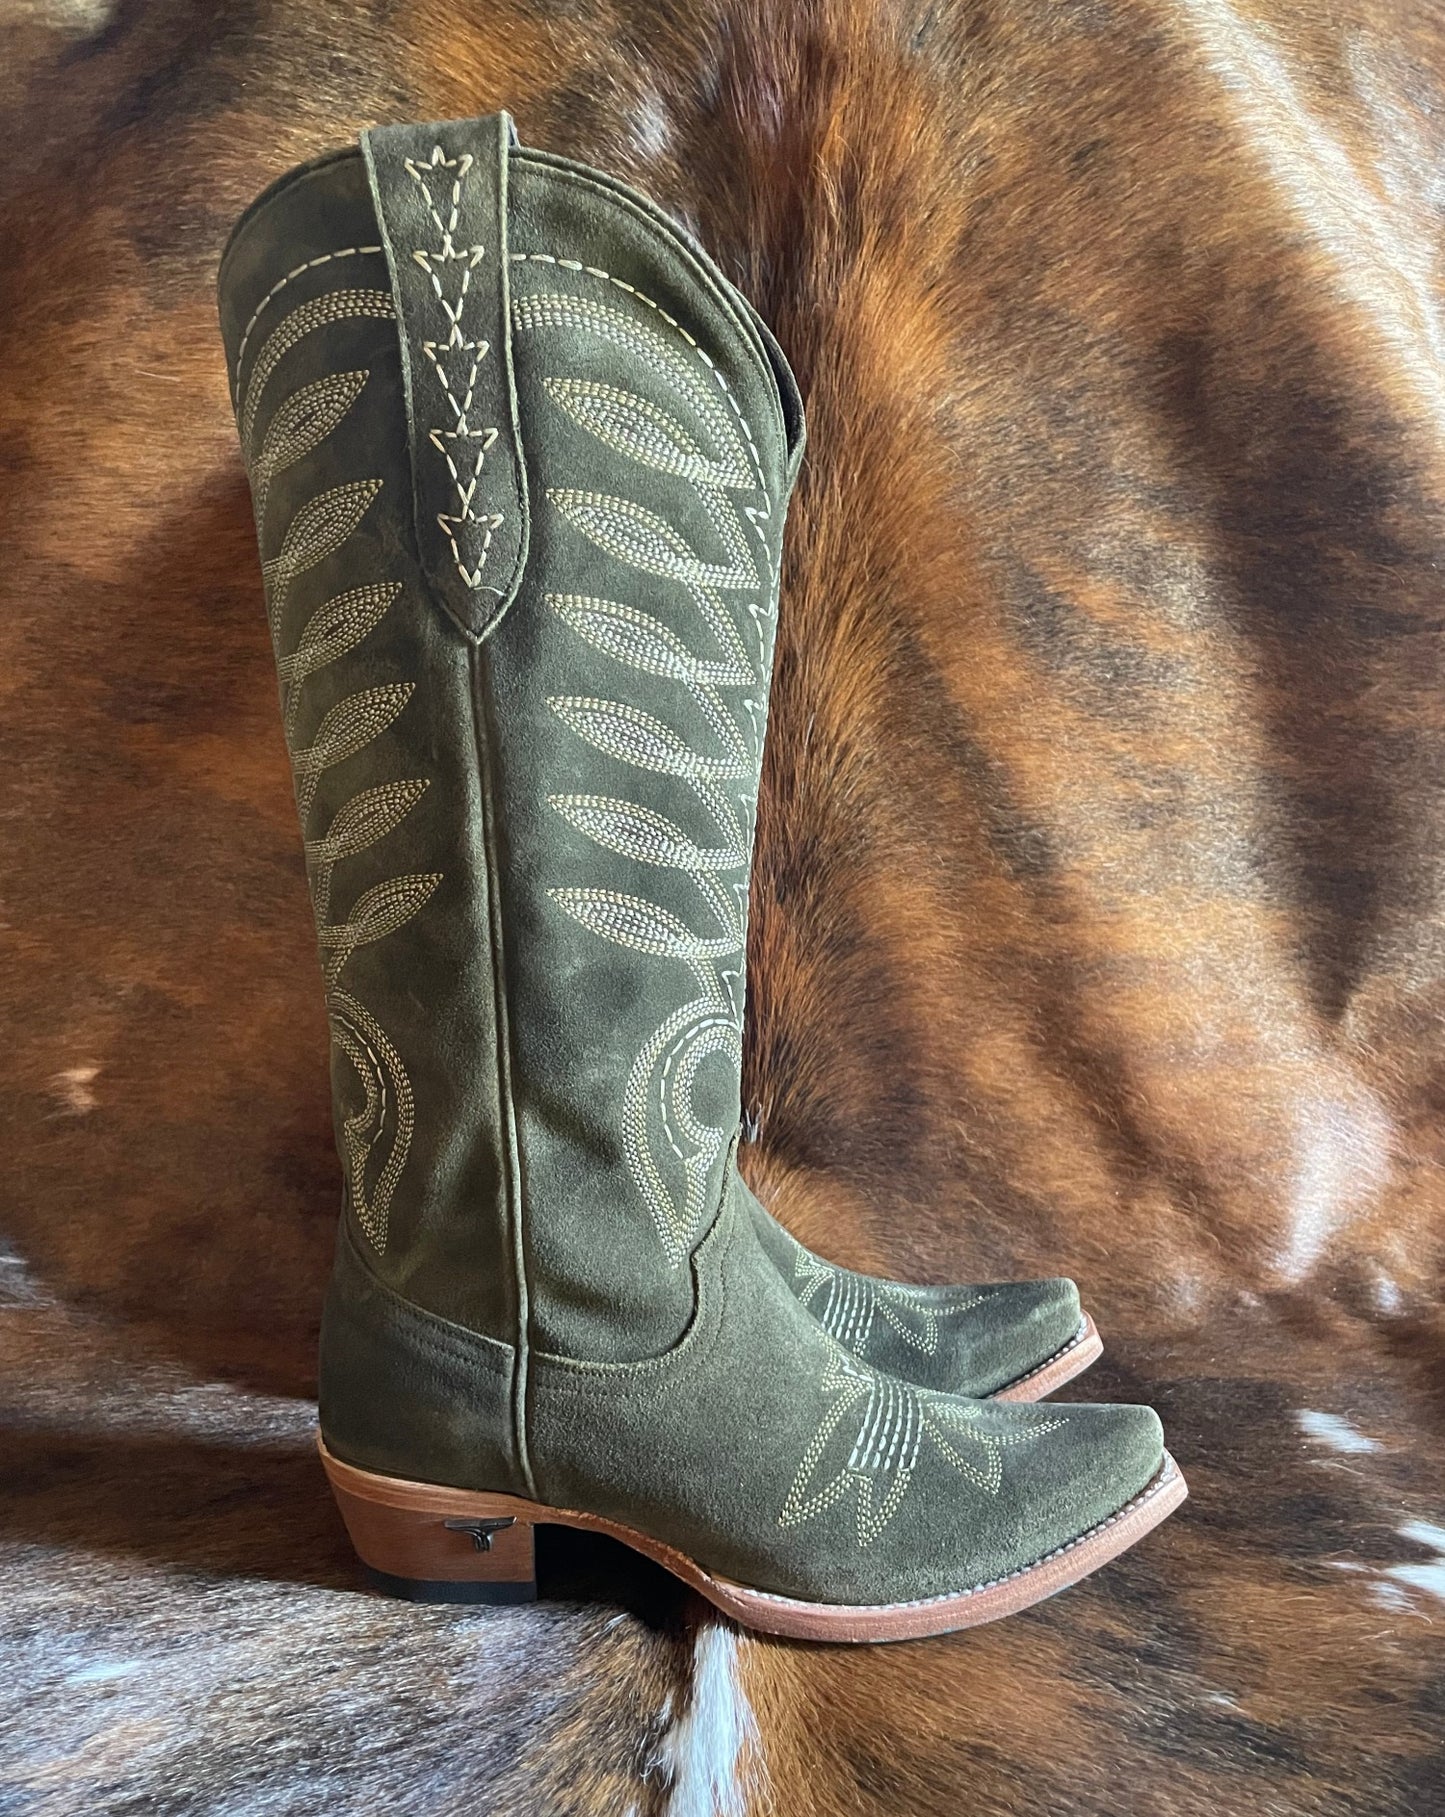 Squash Blossom Boots (Olive Suede)